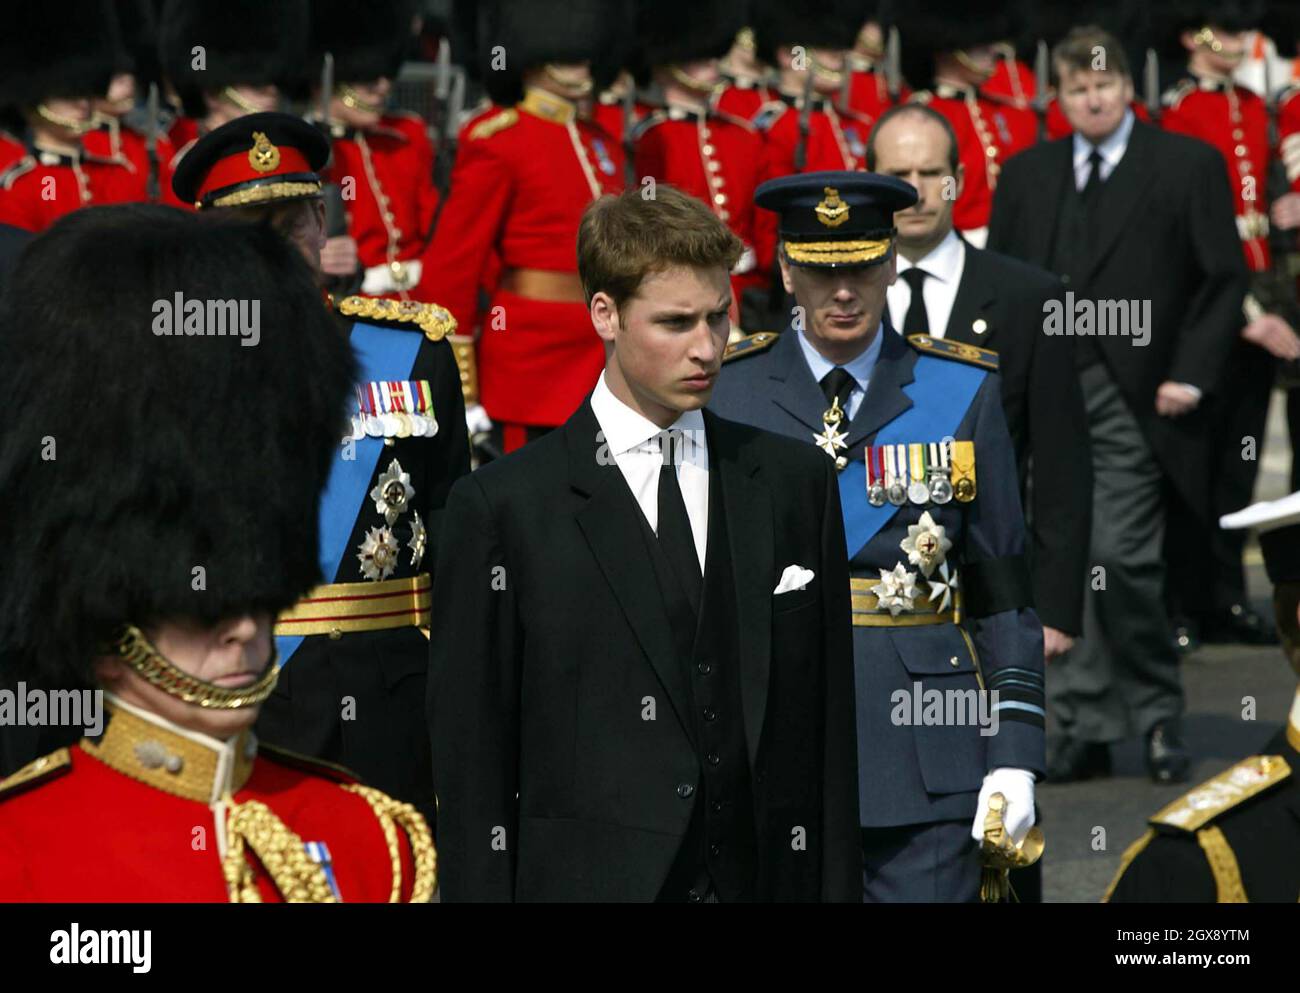 The Royal Family, Prince William attending the funeral procession for the Queen Mother in Westminster, London.         Stock Photo